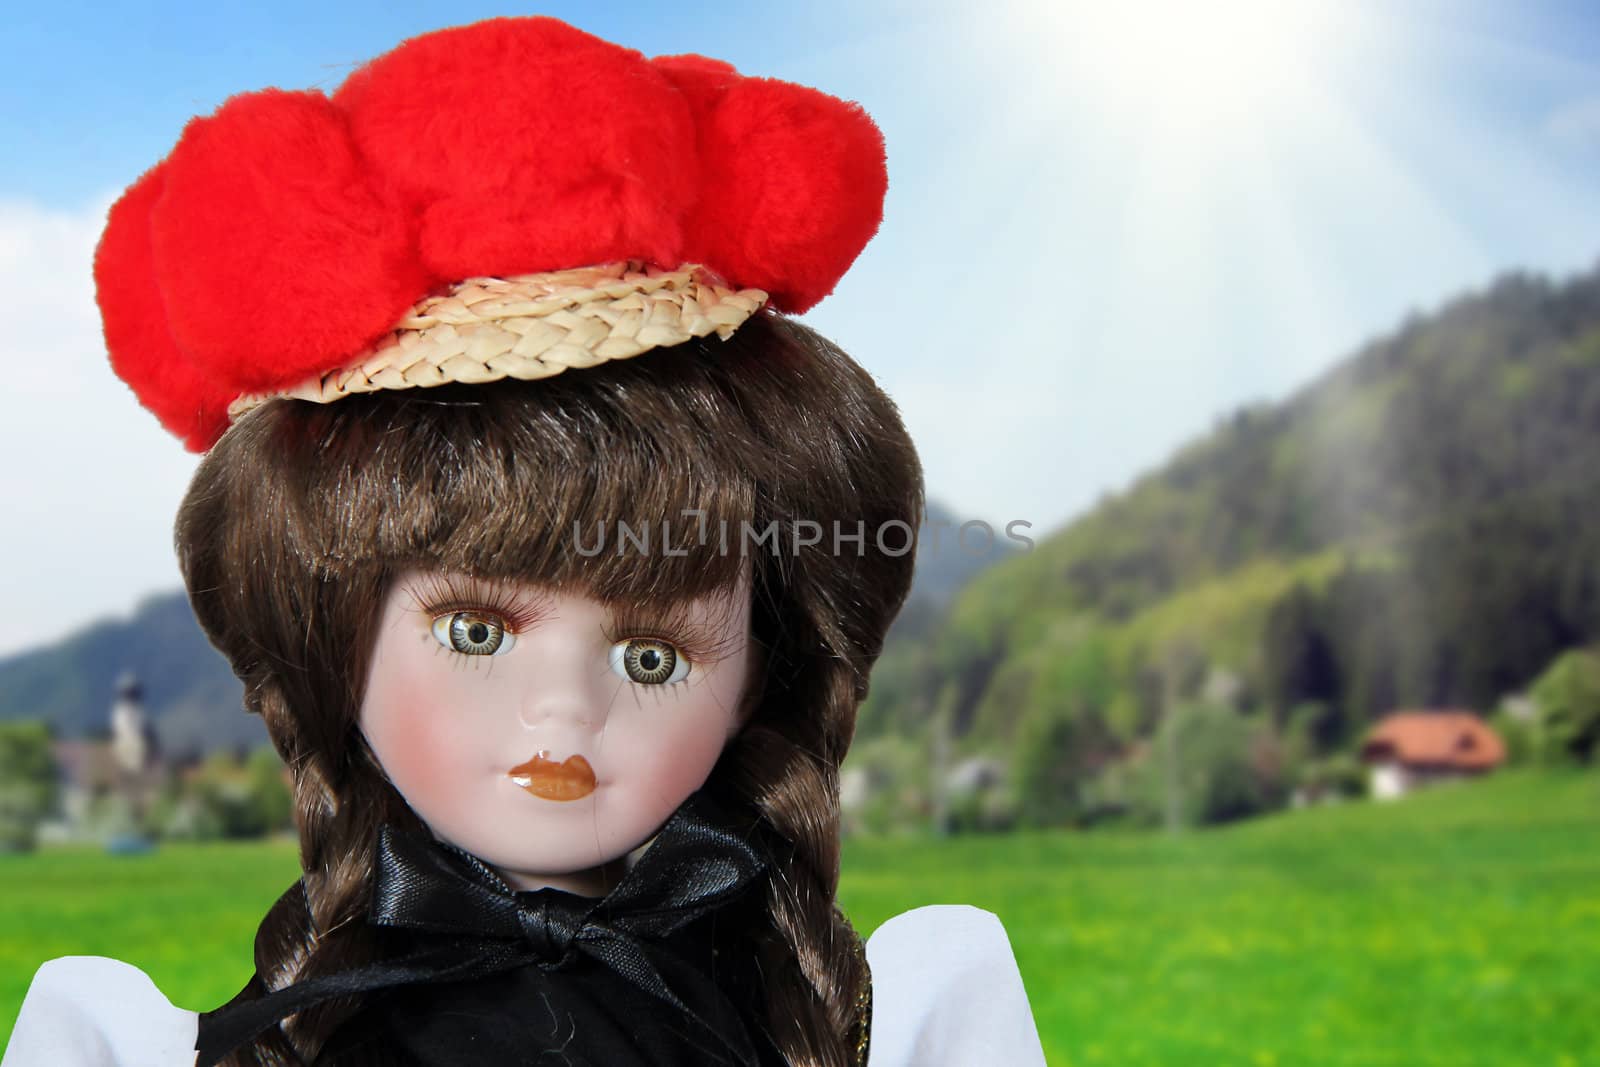 Black forest girl by Hasenonkel